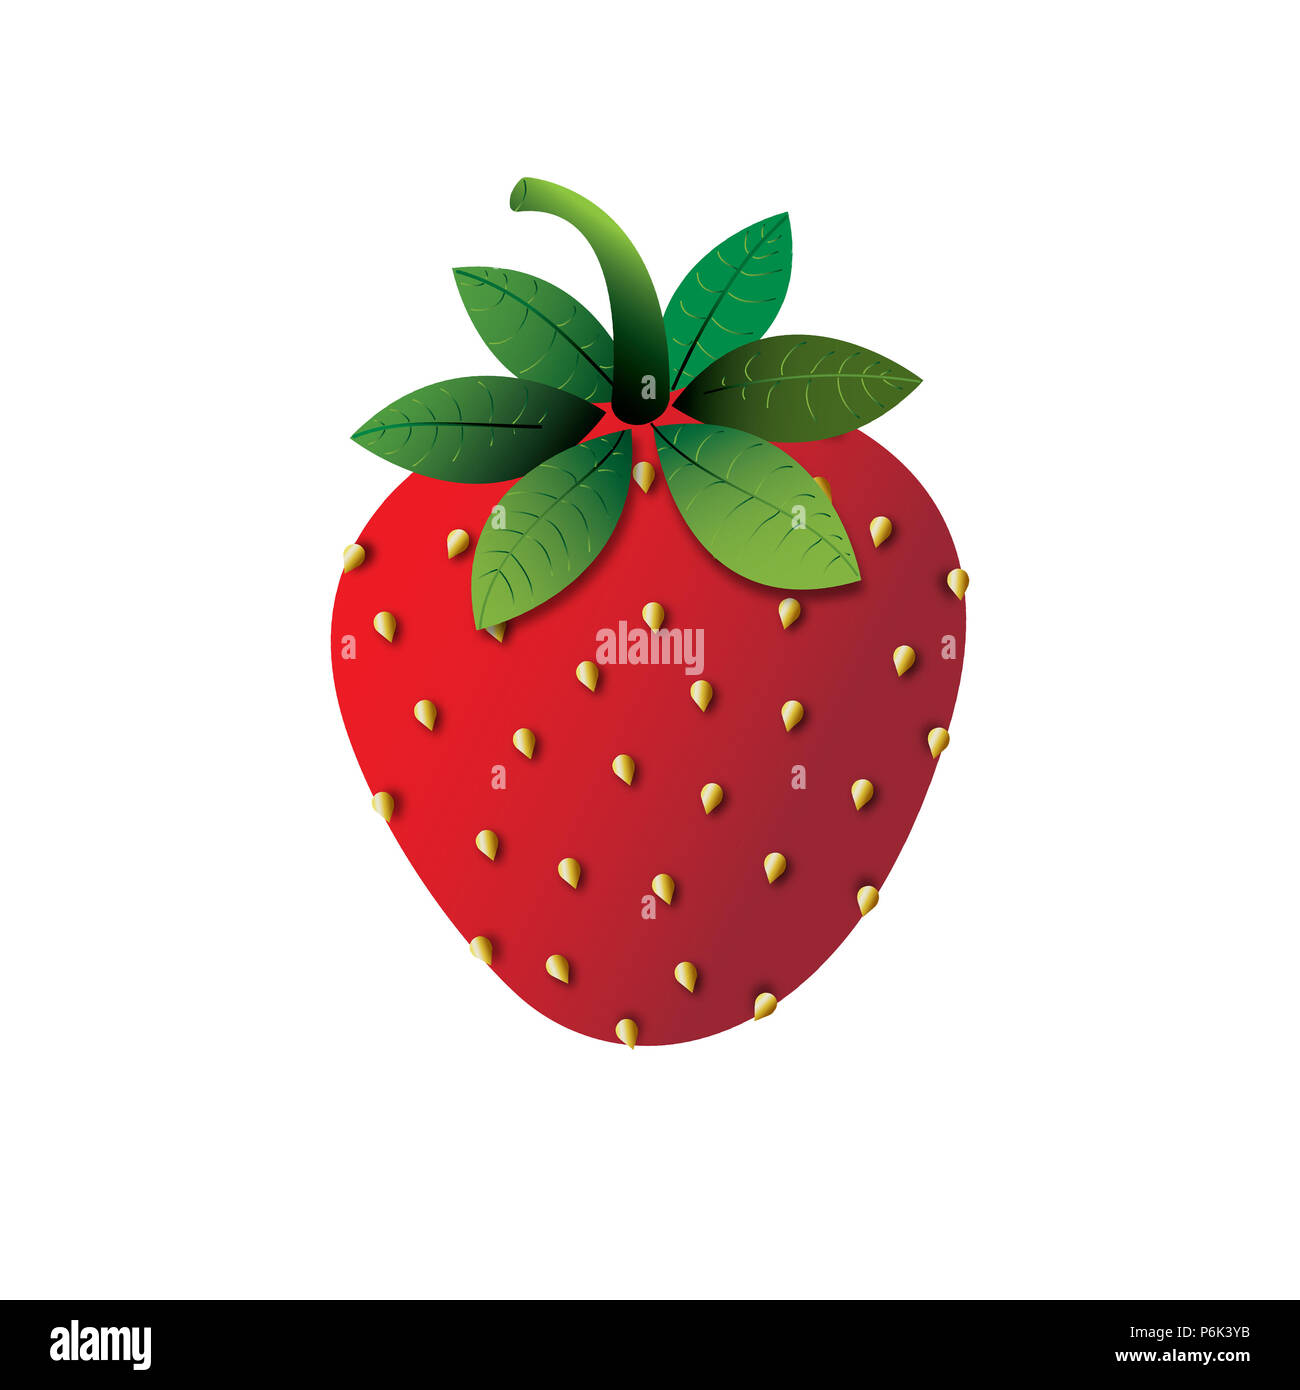 Illustration of a realistic strawberry against a white background. Fresh, modern, bright. Stock Photo